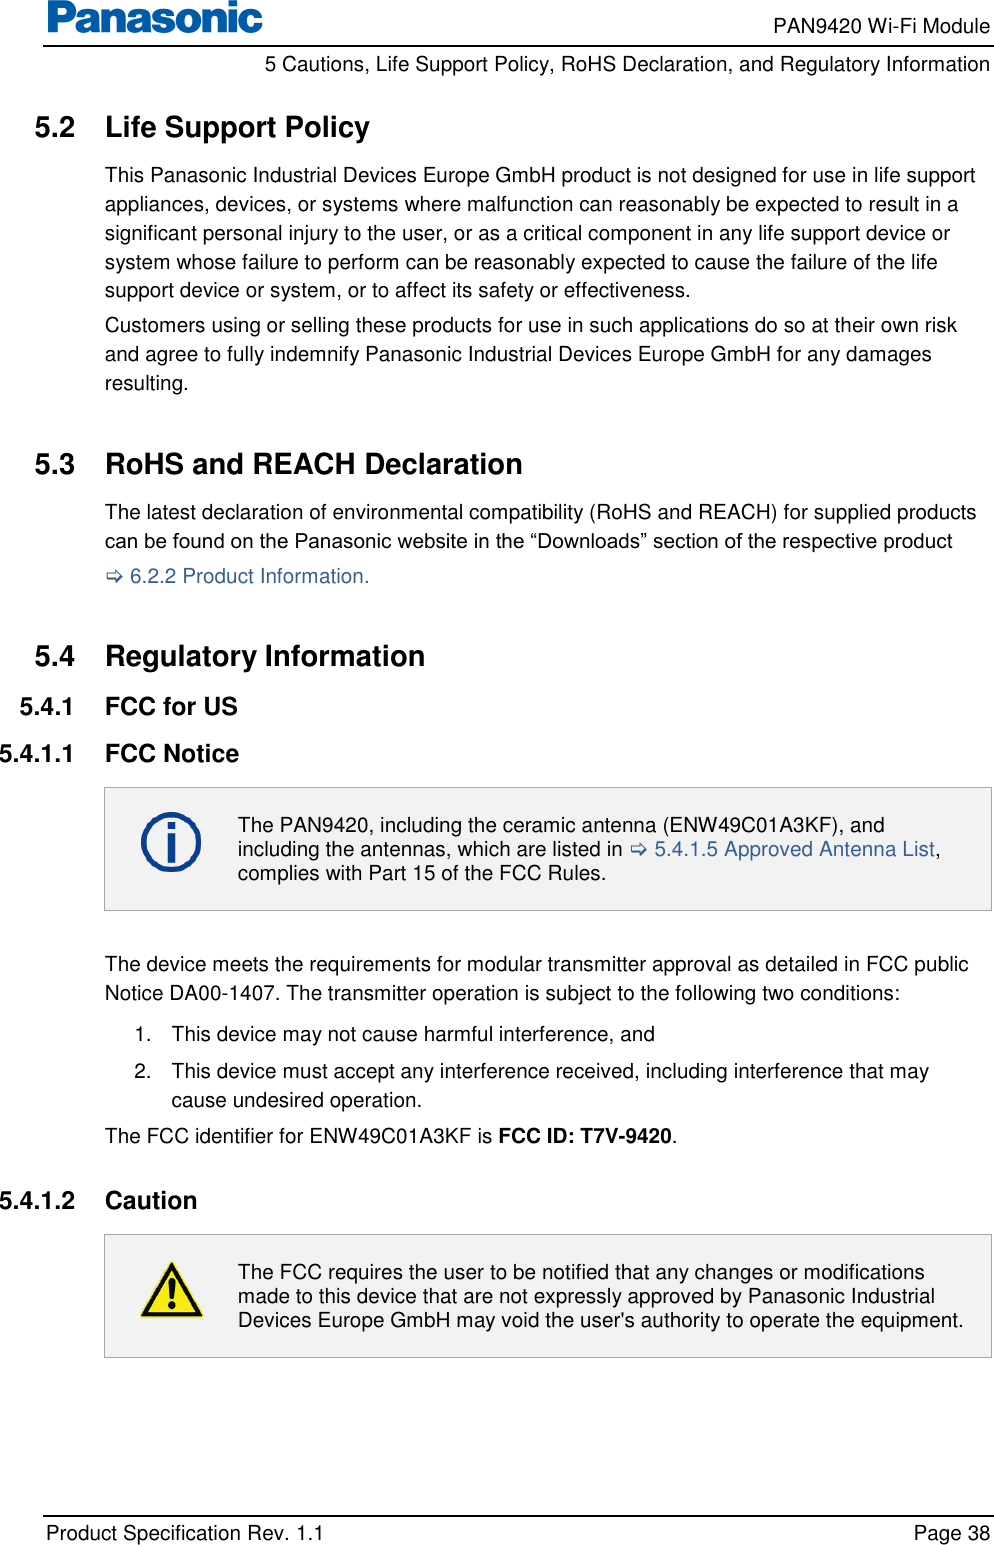     PAN9420 Wi-Fi Module         5 Cautions, Life Support Policy, RoHS Declaration, and Regulatory Information    Product Specification Rev. 1.1    Page 38  5.2  Life Support Policy This Panasonic Industrial Devices Europe GmbH product is not designed for use in life support appliances, devices, or systems where malfunction can reasonably be expected to result in a significant personal injury to the user, or as a critical component in any life support device or system whose failure to perform can be reasonably expected to cause the failure of the life support device or system, or to affect its safety or effectiveness. Customers using or selling these products for use in such applications do so at their own risk and agree to fully indemnify Panasonic Industrial Devices Europe GmbH for any damages resulting.  5.3  RoHS and REACH Declaration The latest declaration of environmental compatibility (RoHS and REACH) for supplied products can be found on the Panasonic website in the “Downloads” section of the respective product  6.2.2 Product Information.  5.4  Regulatory Information 5.4.1  FCC for US 5.4.1.1  FCC Notice  The PAN9420, including the ceramic antenna (ENW49C01A3KF), and including the antennas, which are listed in  5.4.1.5 Approved Antenna List, complies with Part 15 of the FCC Rules.  The device meets the requirements for modular transmitter approval as detailed in FCC public Notice DA00-1407. The transmitter operation is subject to the following two conditions: 1.  This device may not cause harmful interference, and  2.  This device must accept any interference received, including interference that may cause undesired operation. The FCC identifier for ENW49C01A3KF is FCC ID: T7V-9420.  5.4.1.2  Caution  The FCC requires the user to be notified that any changes or modifications made to this device that are not expressly approved by Panasonic Industrial Devices Europe GmbH may void the user&apos;s authority to operate the equipment.  